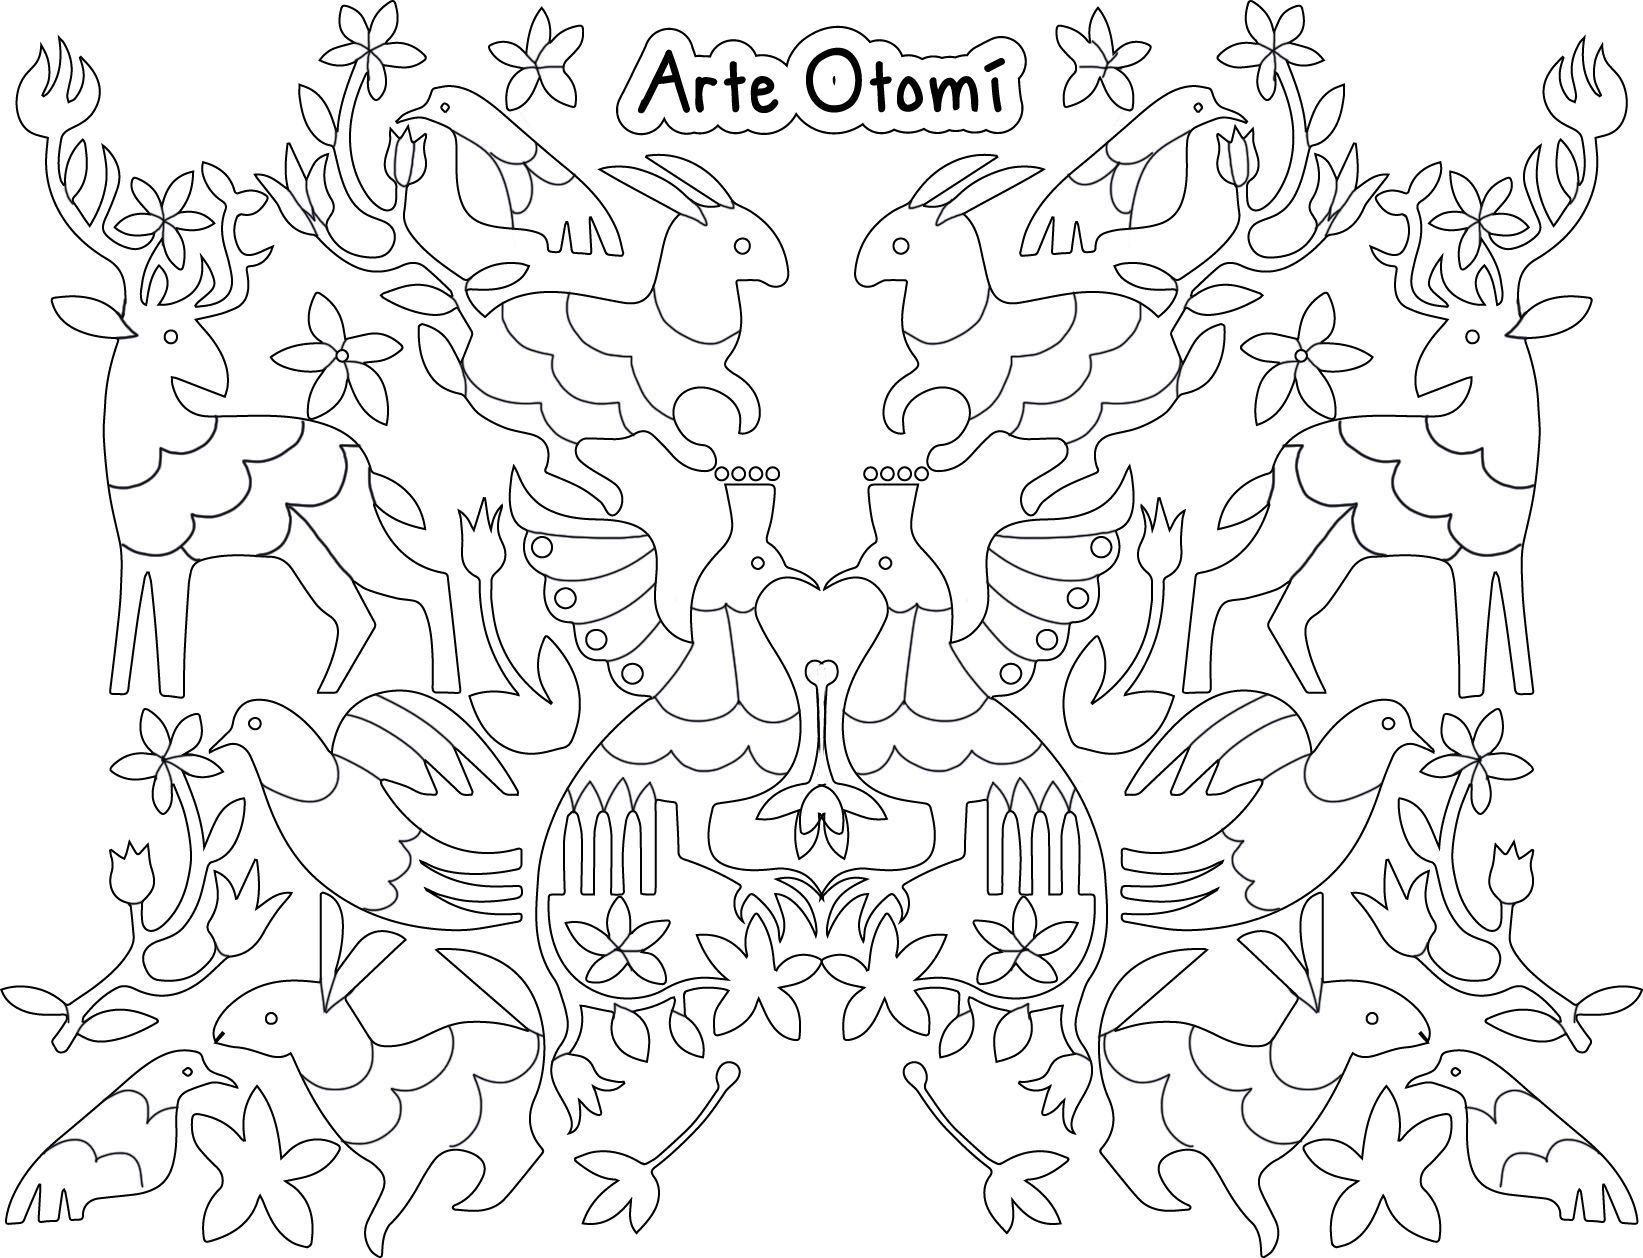 Printable Embroidery Patterns 9 Otomi Embroidery Tutorial And Otomi Embroidery Pattern 101 Craft